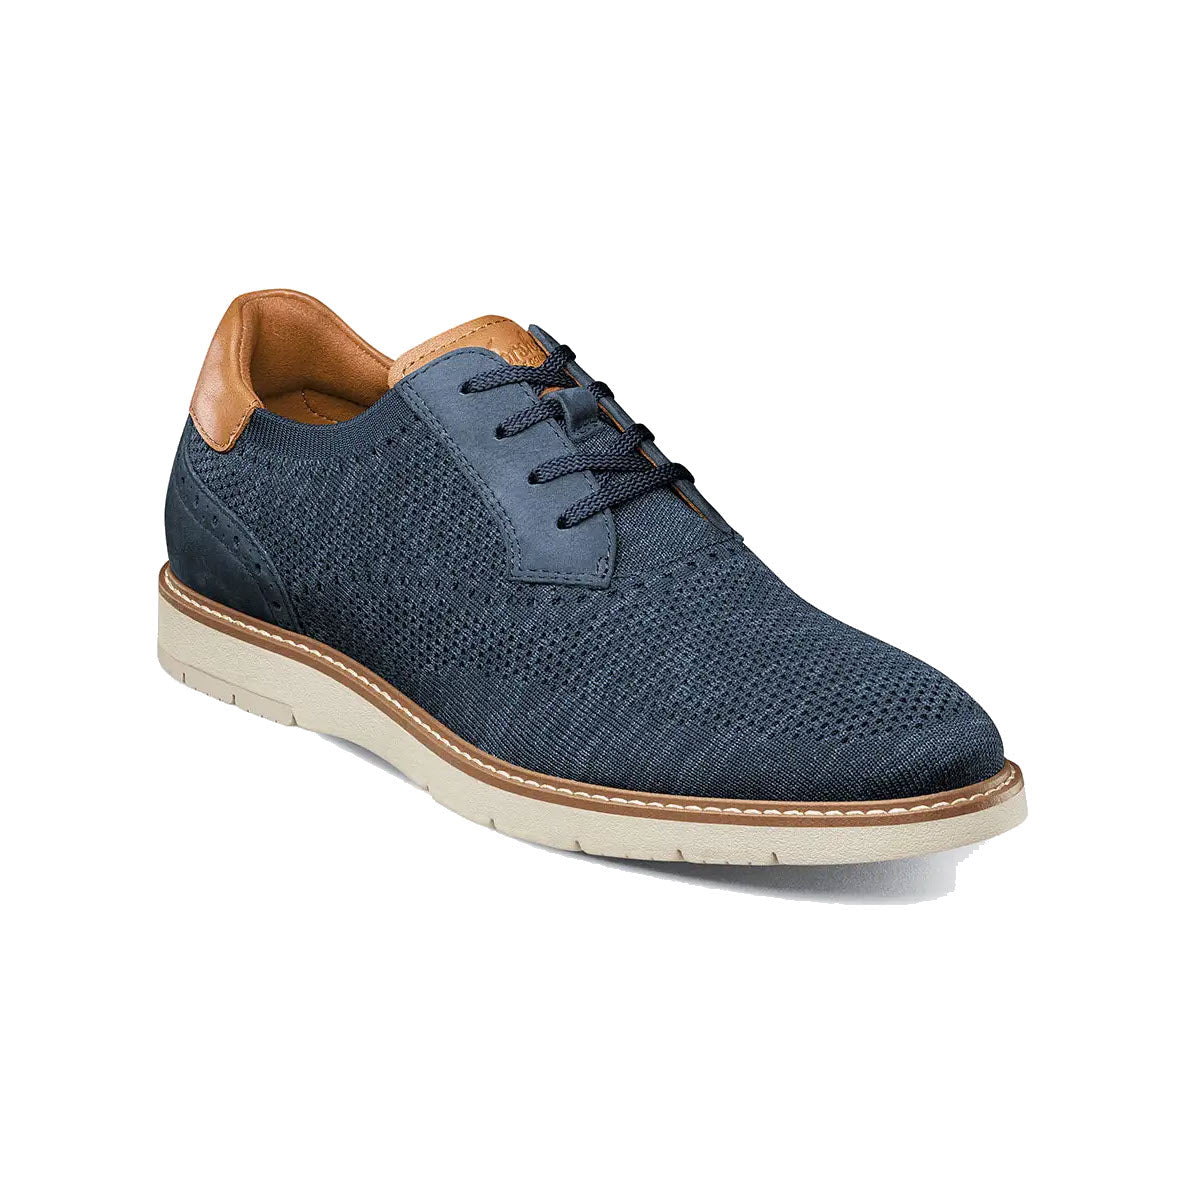 Florsheim navy blue men&#39;s knit oxford dress shoe with a perforated upper, brown leather accents, and a contrasting white sole on a white background.